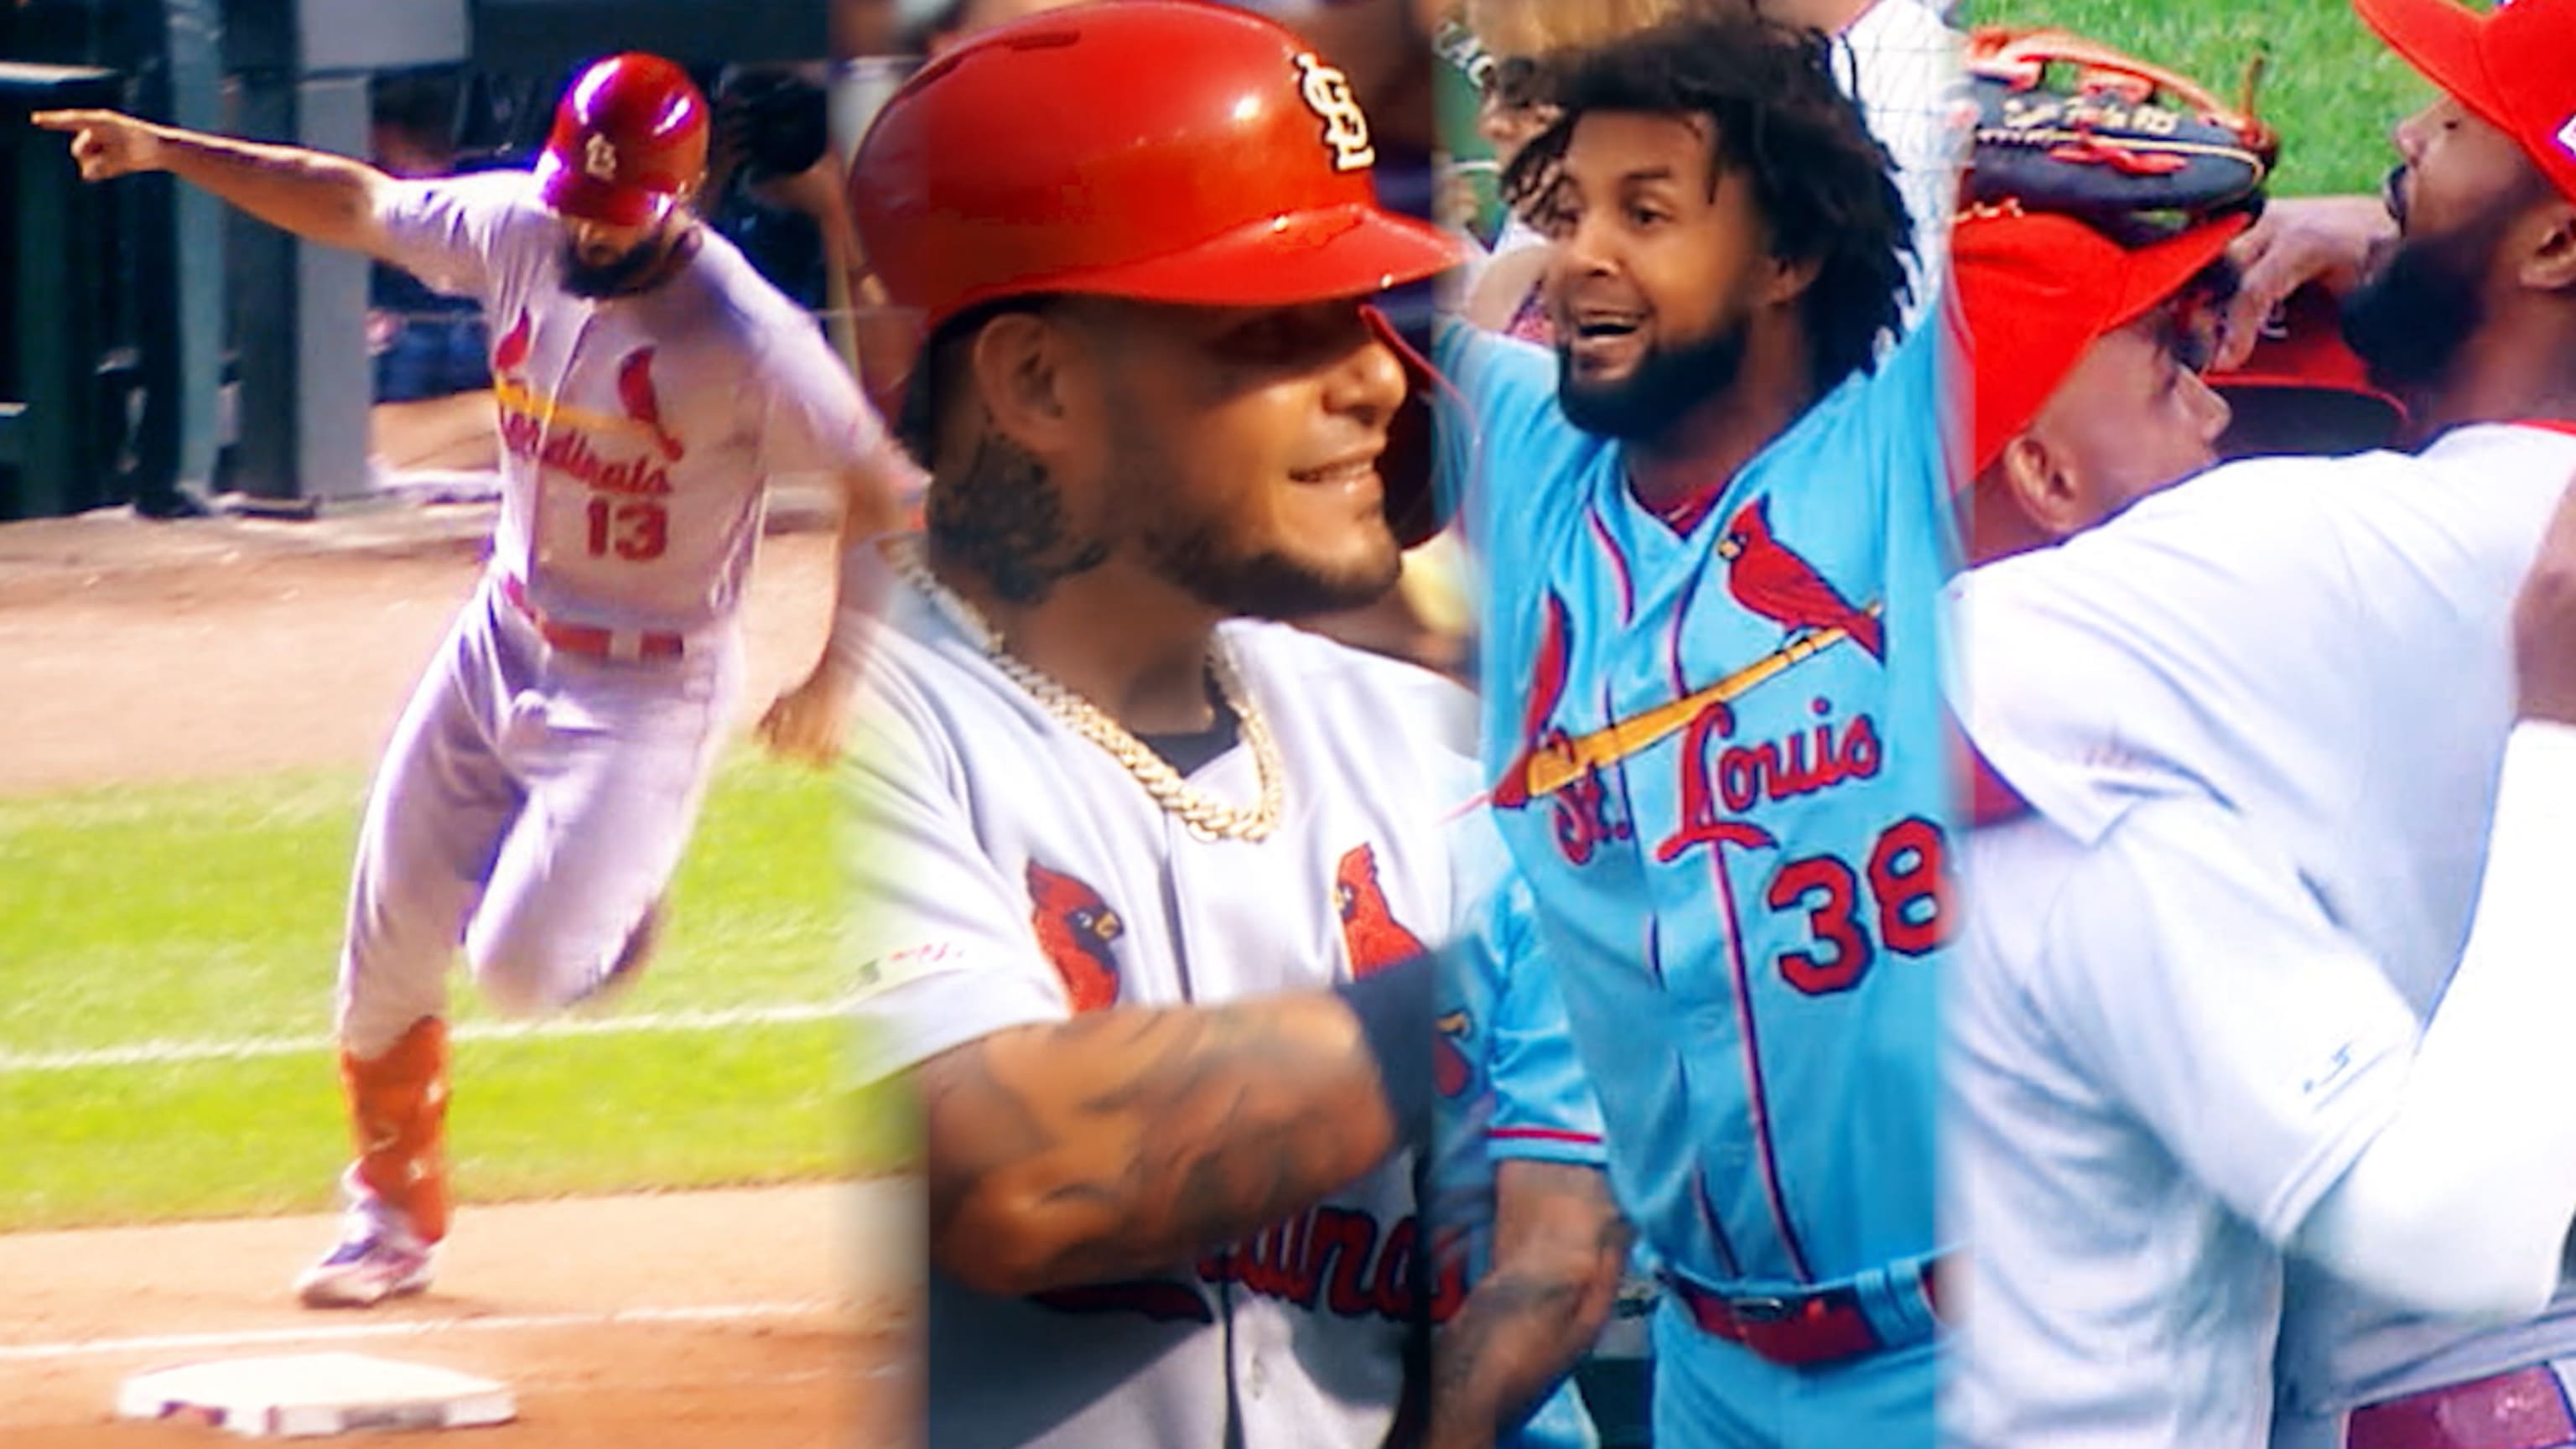 Cubs-Cards rivalry thrives from all sides at Legends Game